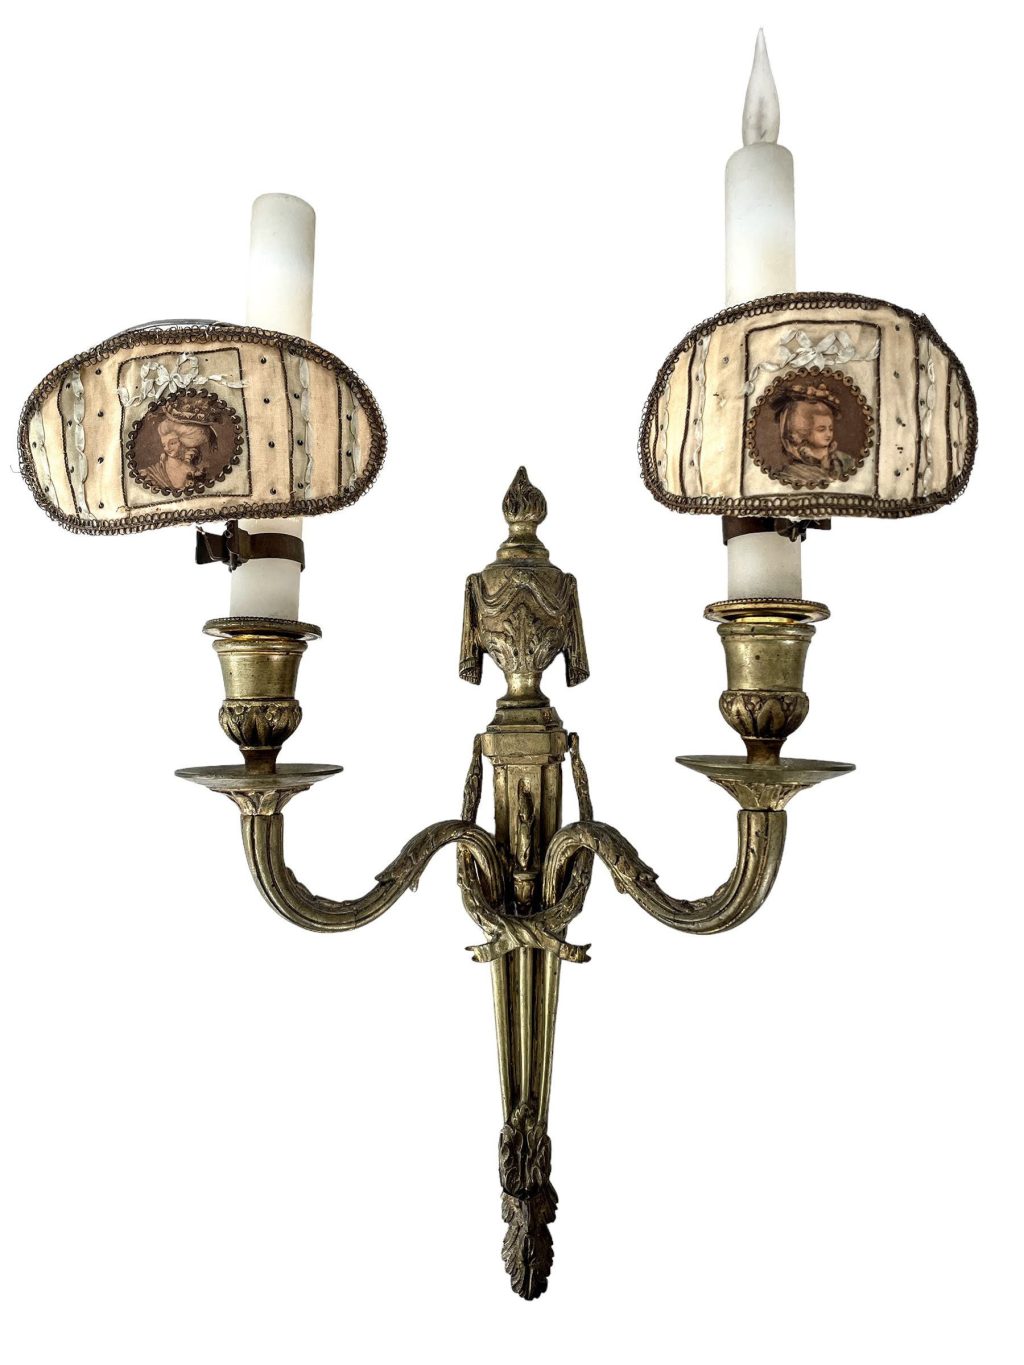 Antique French Brass Double Light Wall Hanging Converted Candle To Electric Lantern Lamp Ornament Decor Design c1850-1960’s / EVE